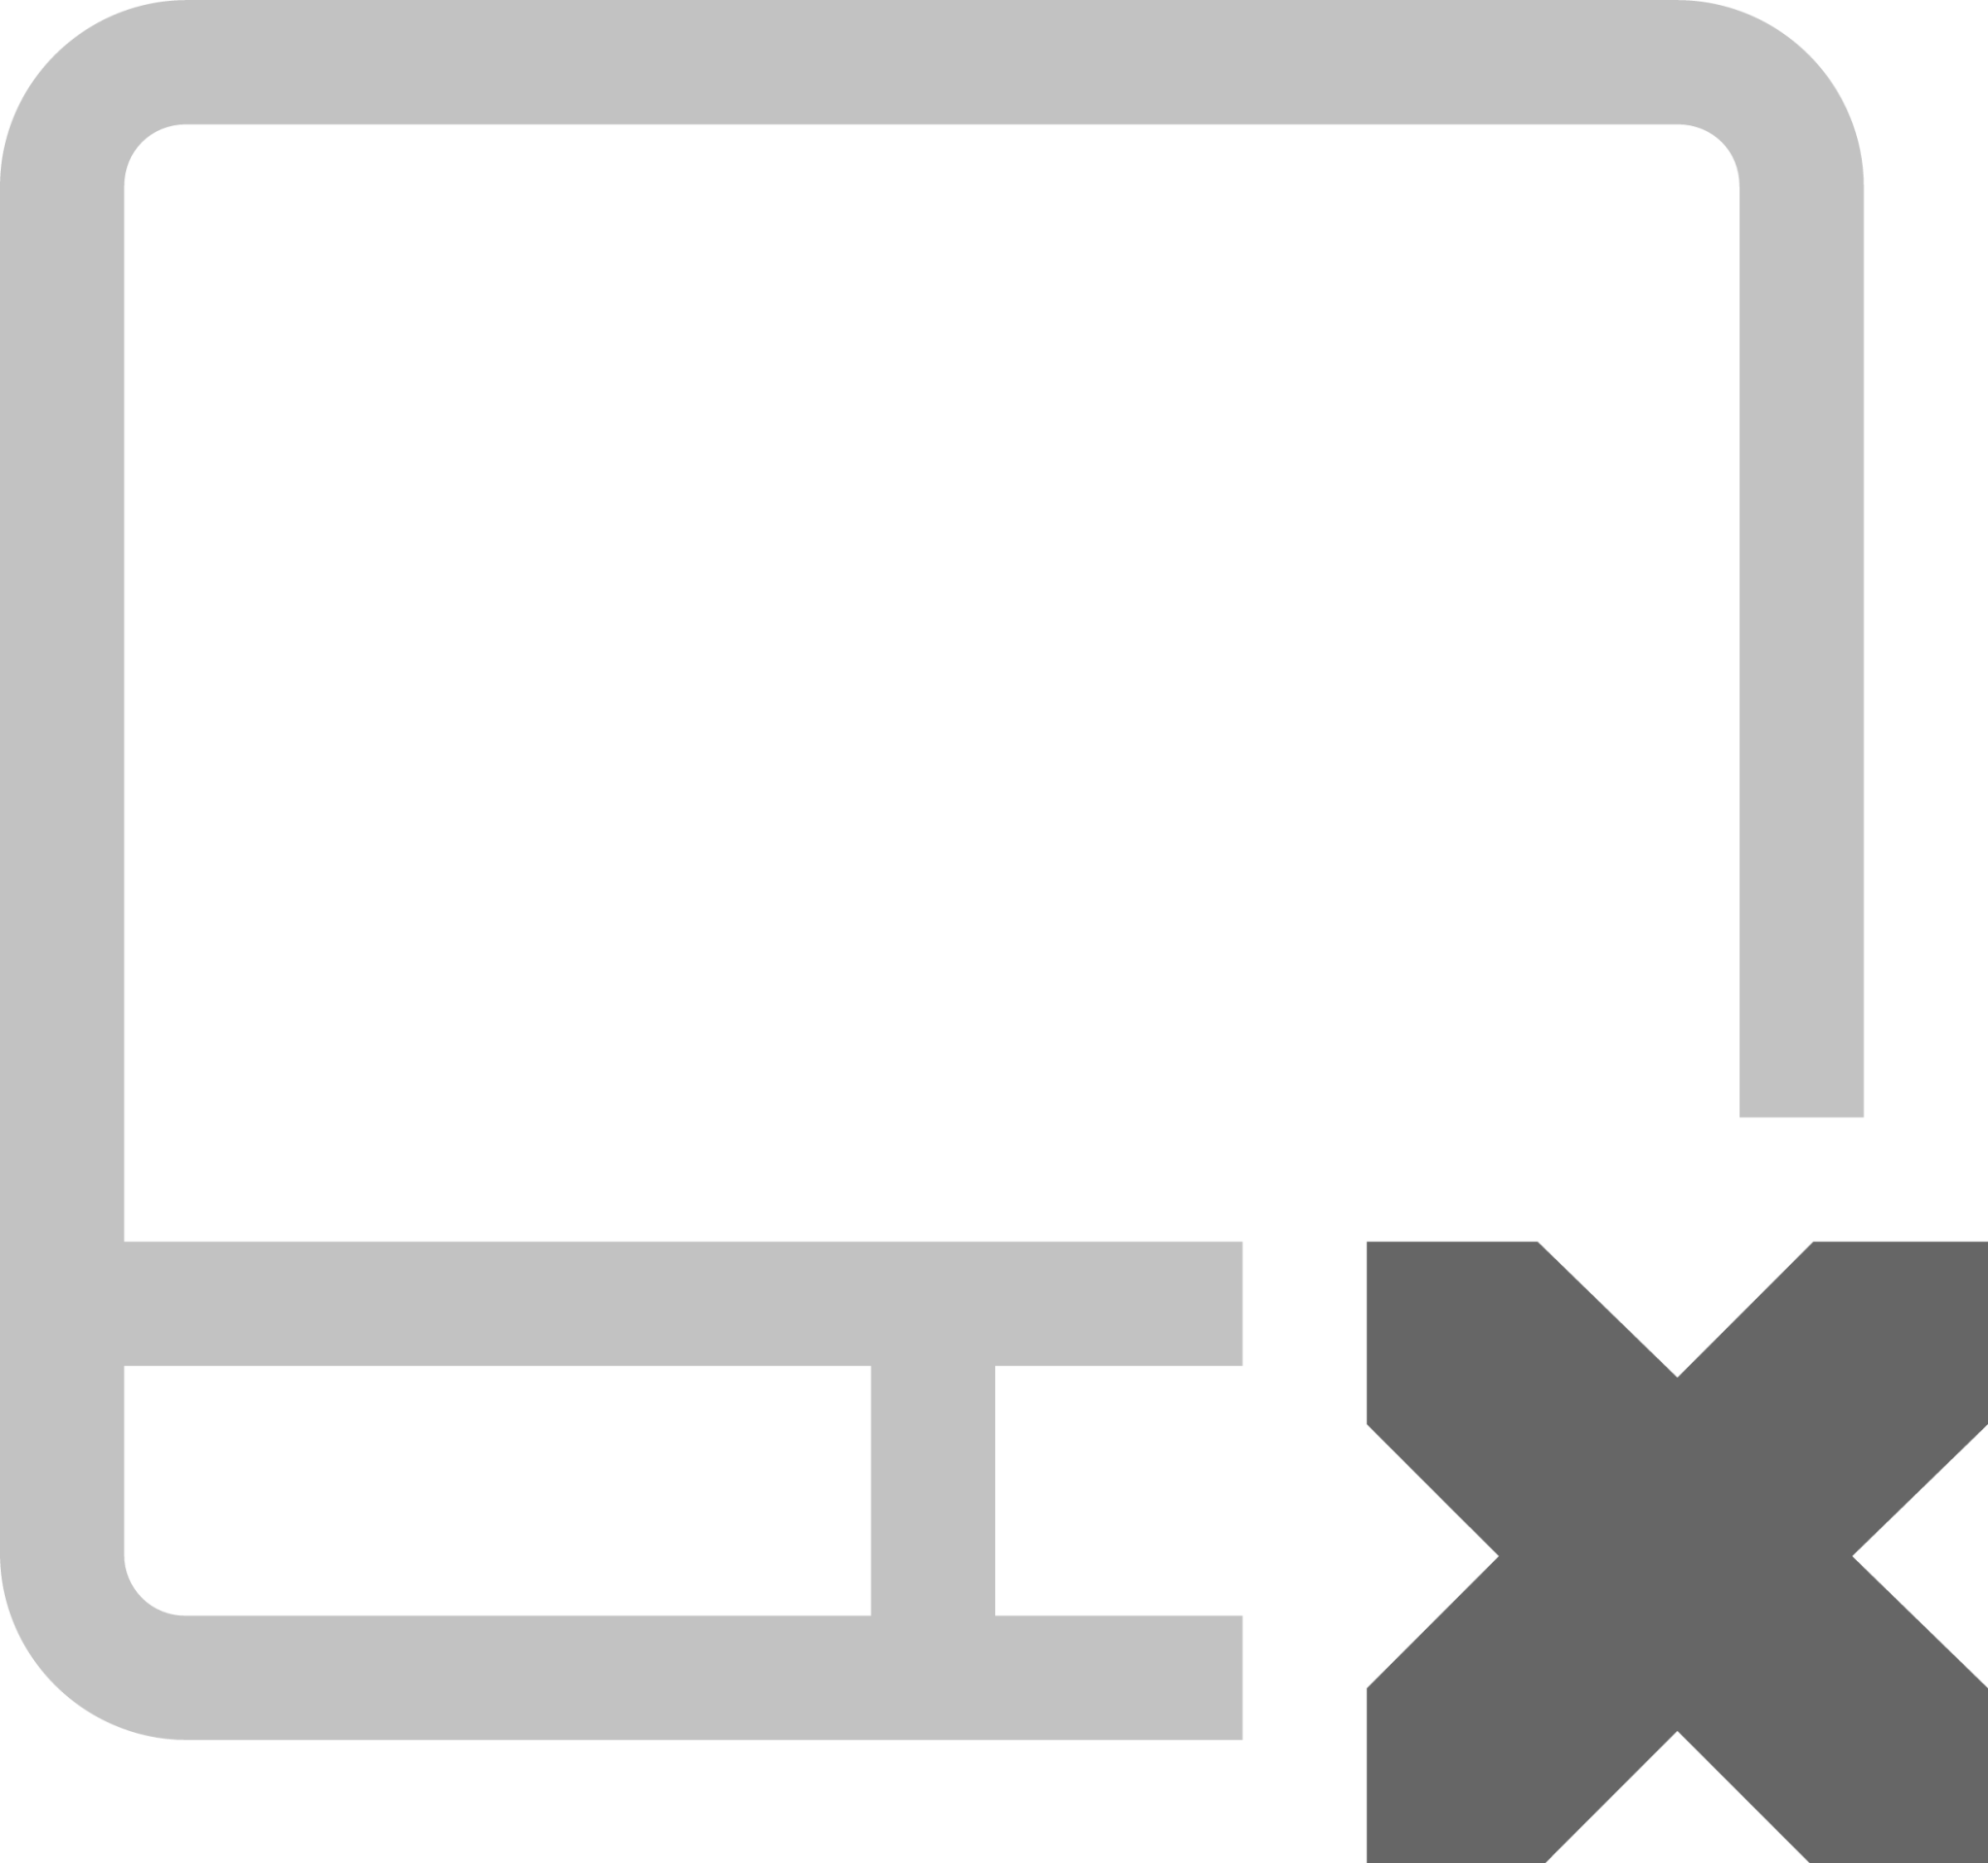 touchpad disabled symbolic icon